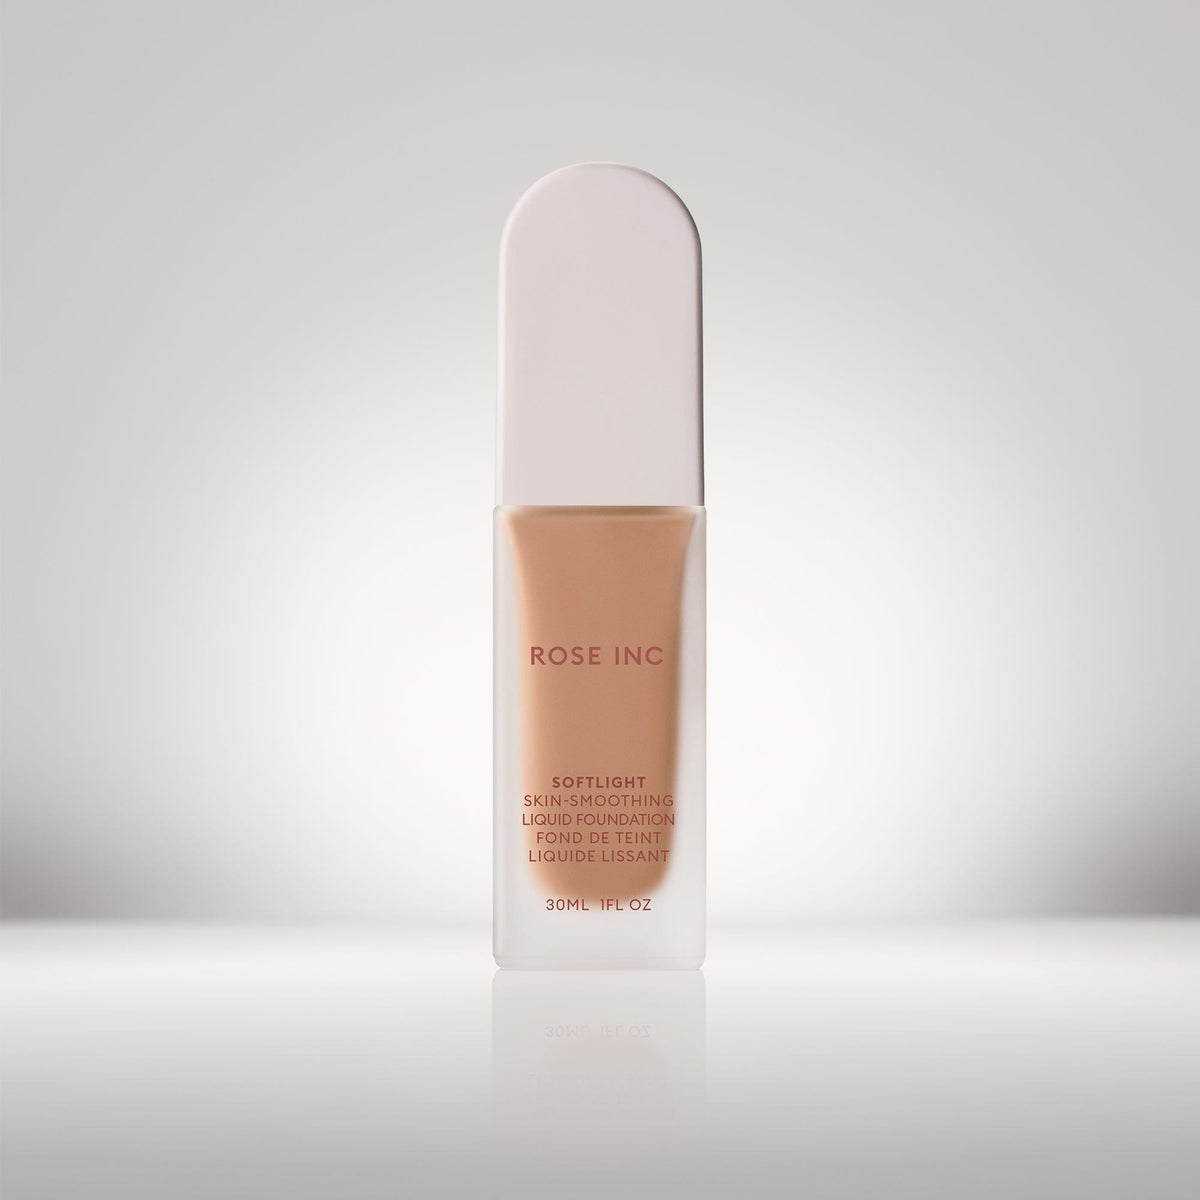 Soldier image of shade 17C in Softlight Smoothing Foundation